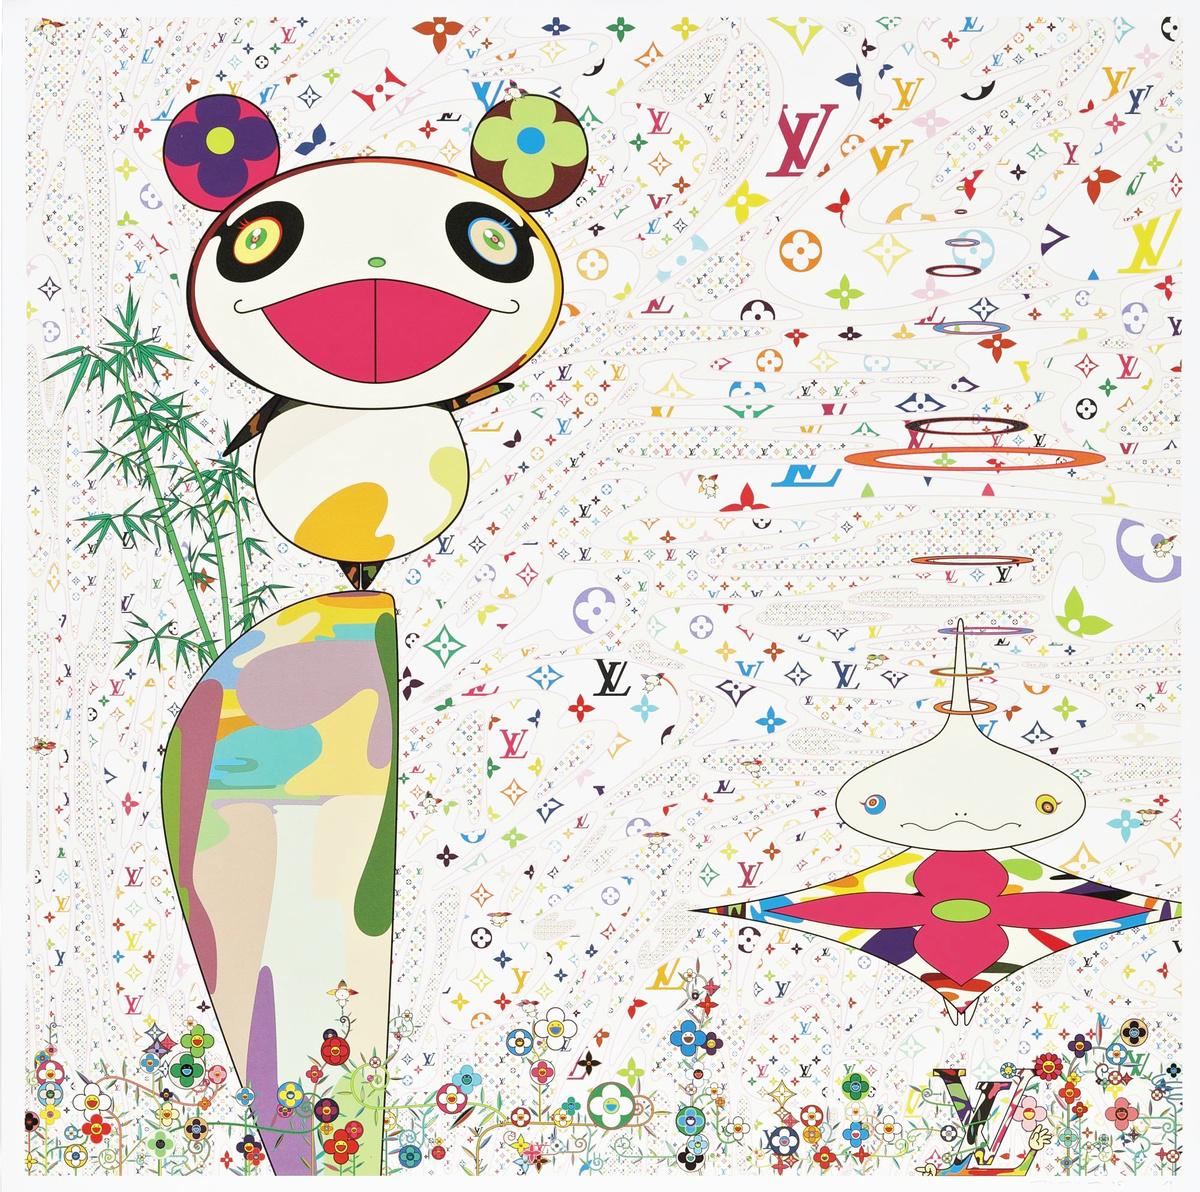 Louis Vuitton x Murakami Was The Defining Fashion Collaboration Of The  Noughties  British Vogue